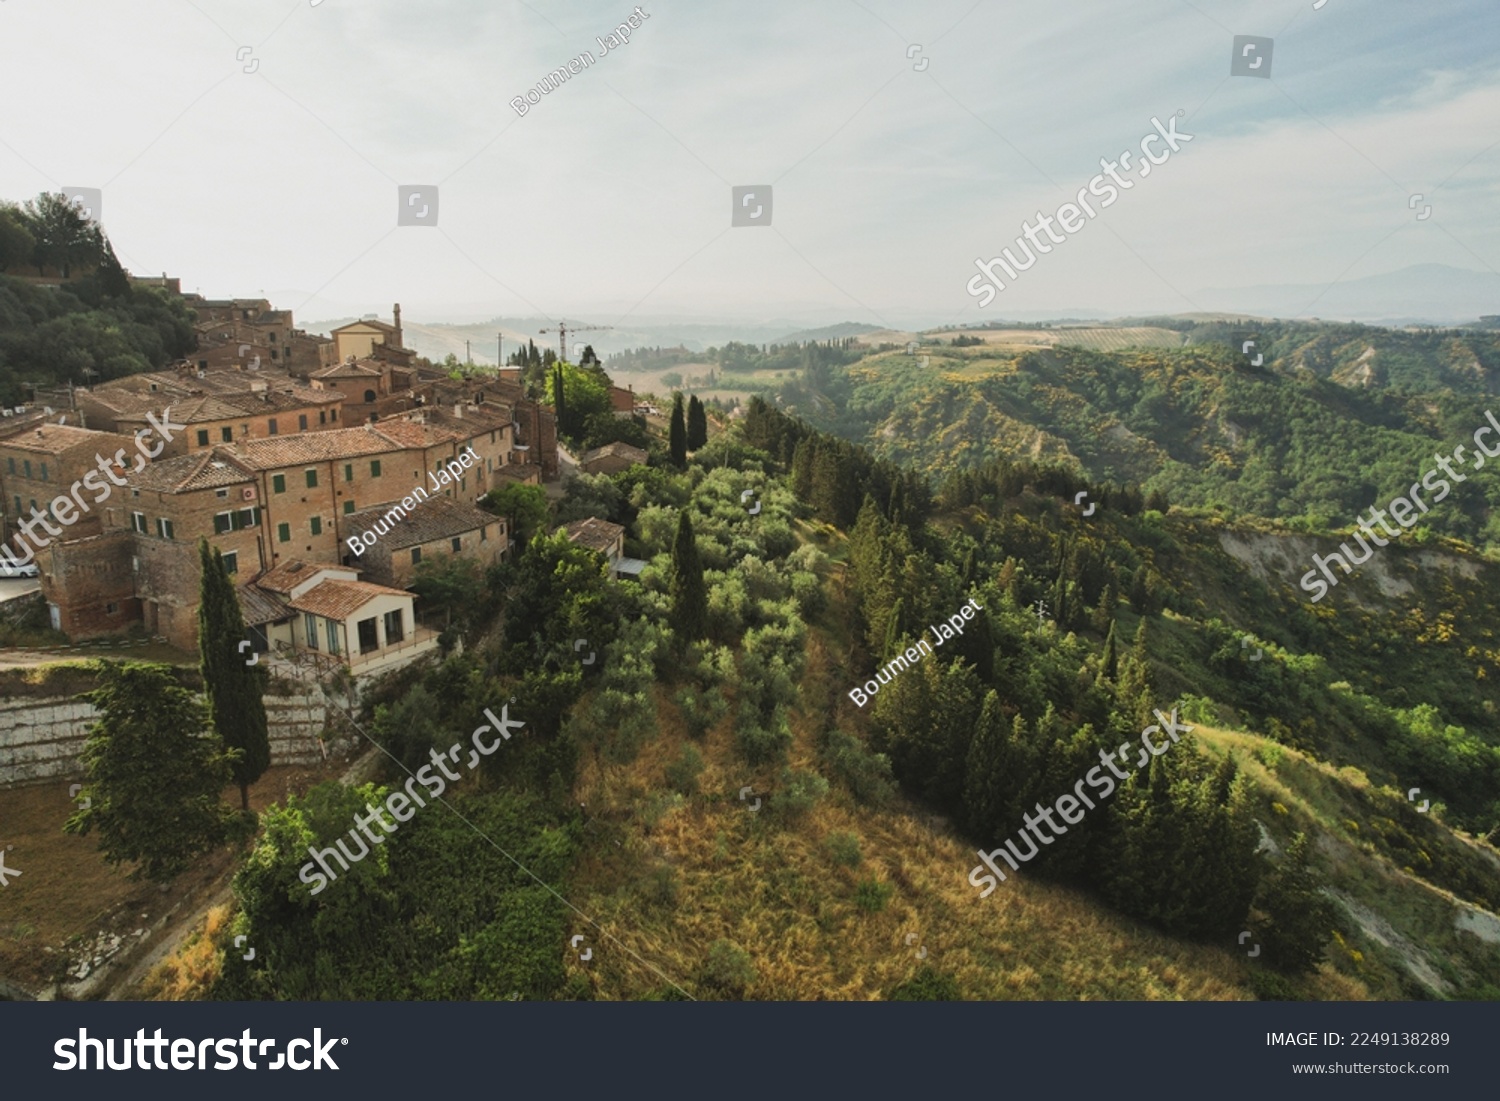 Small village of Chiusure on top of the hill surrounded by Karst cliffs landscape photographed with a drone. Toscana, Tuscany, Asciano, province of Siena in Italy with a little mud road 06.16.2021 #2249138289